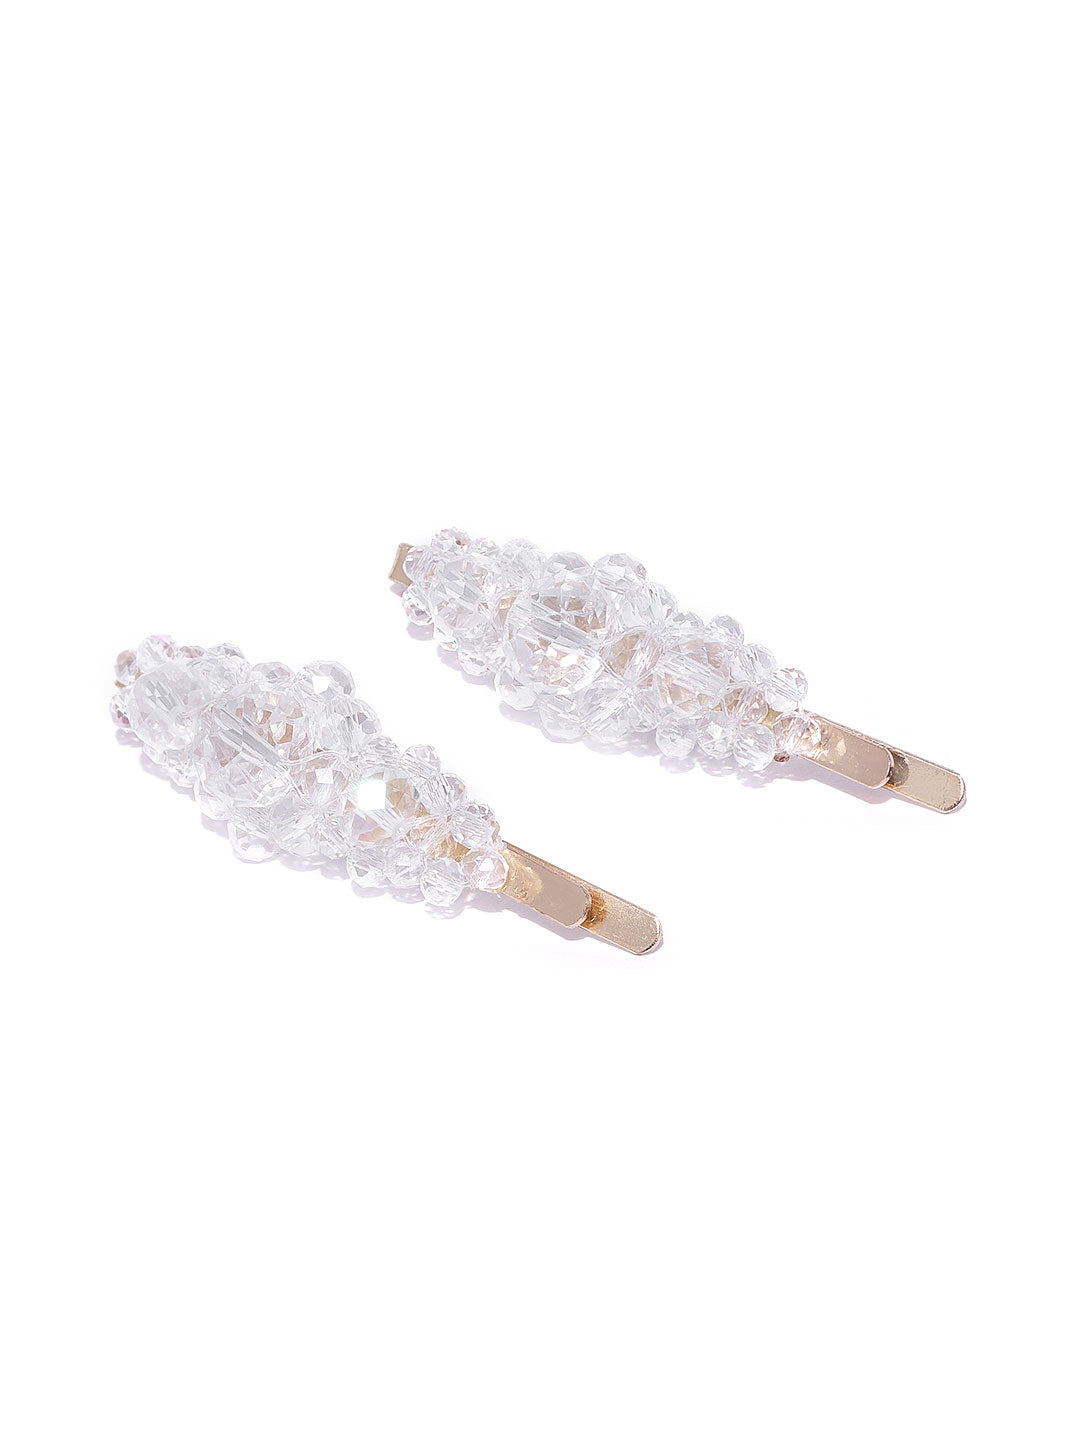 Blueberry set of 2 white crystal beads detailing hair pins